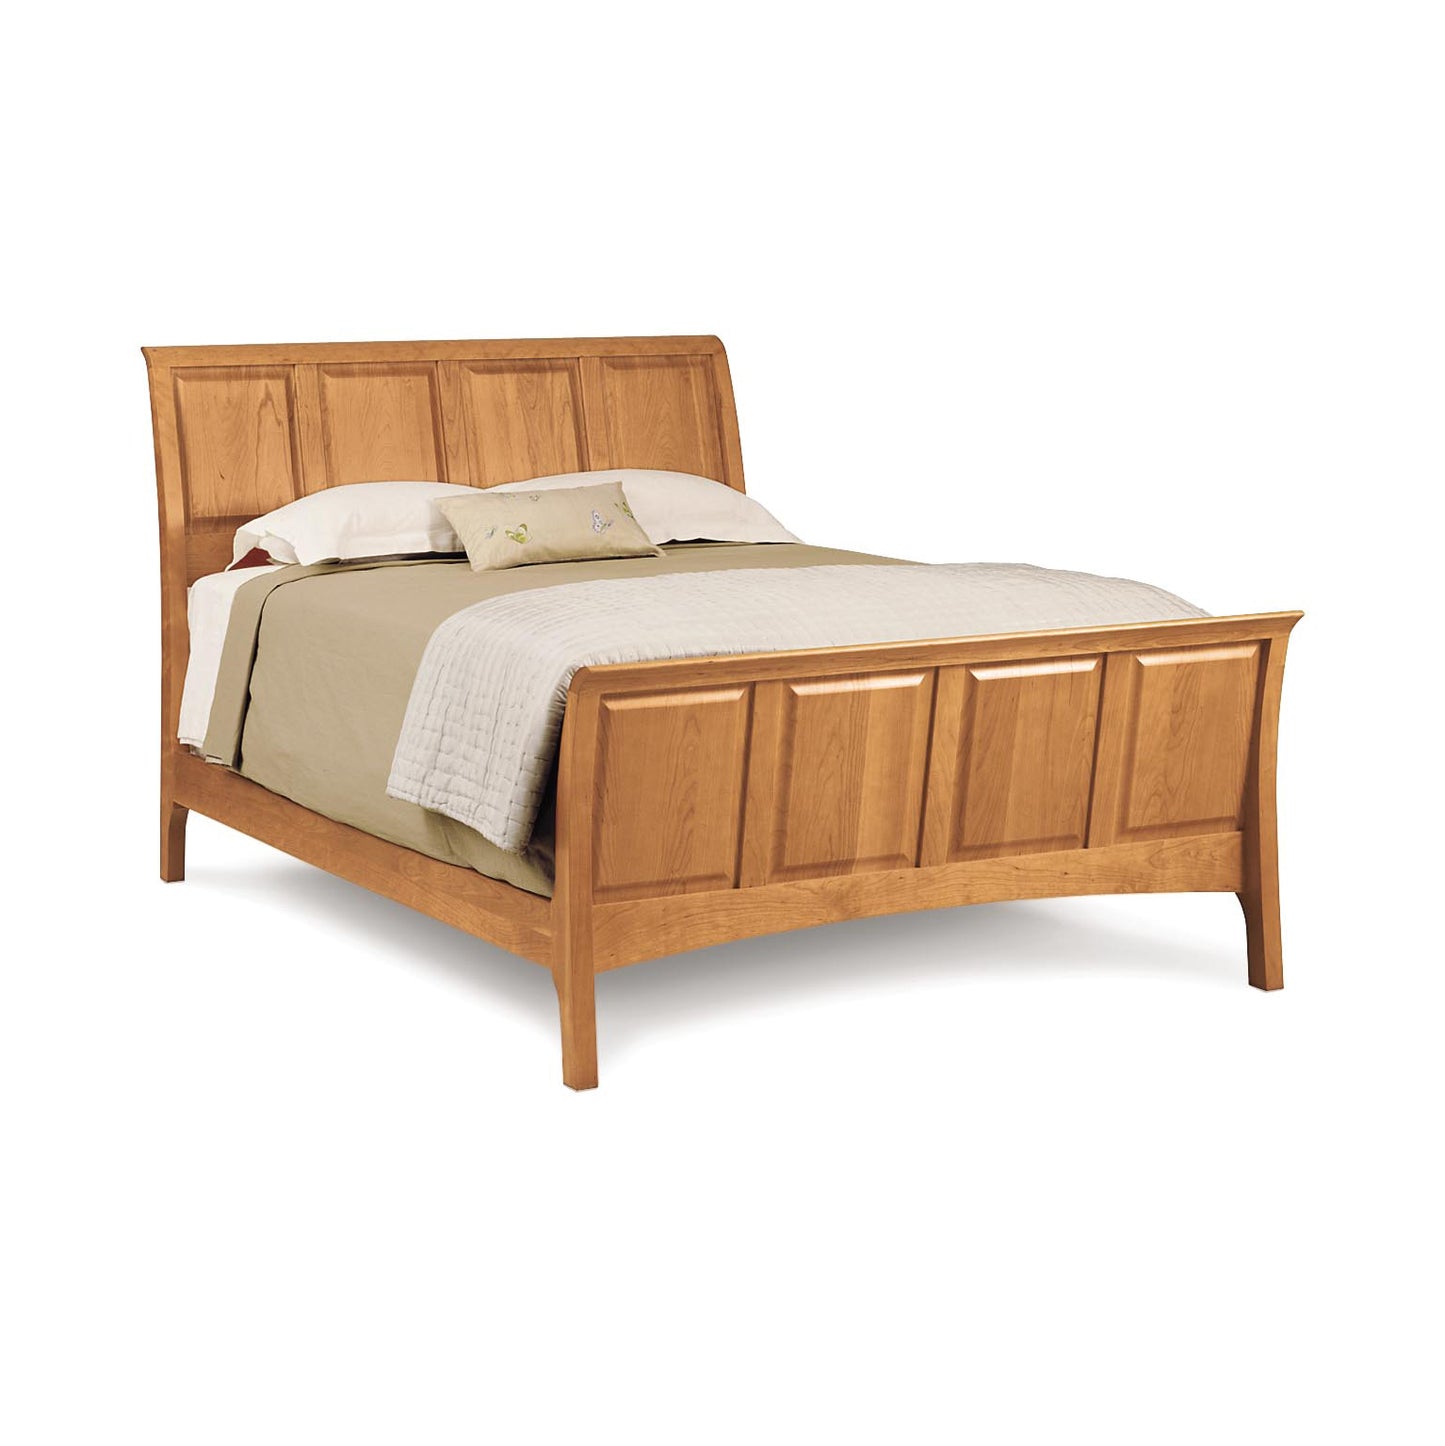 The Copeland Furniture Sarah High Footboard Sleigh Bed is a beautiful piece of shaker-style furniture made from cherry wood, featuring a wooden headboard and footboard.